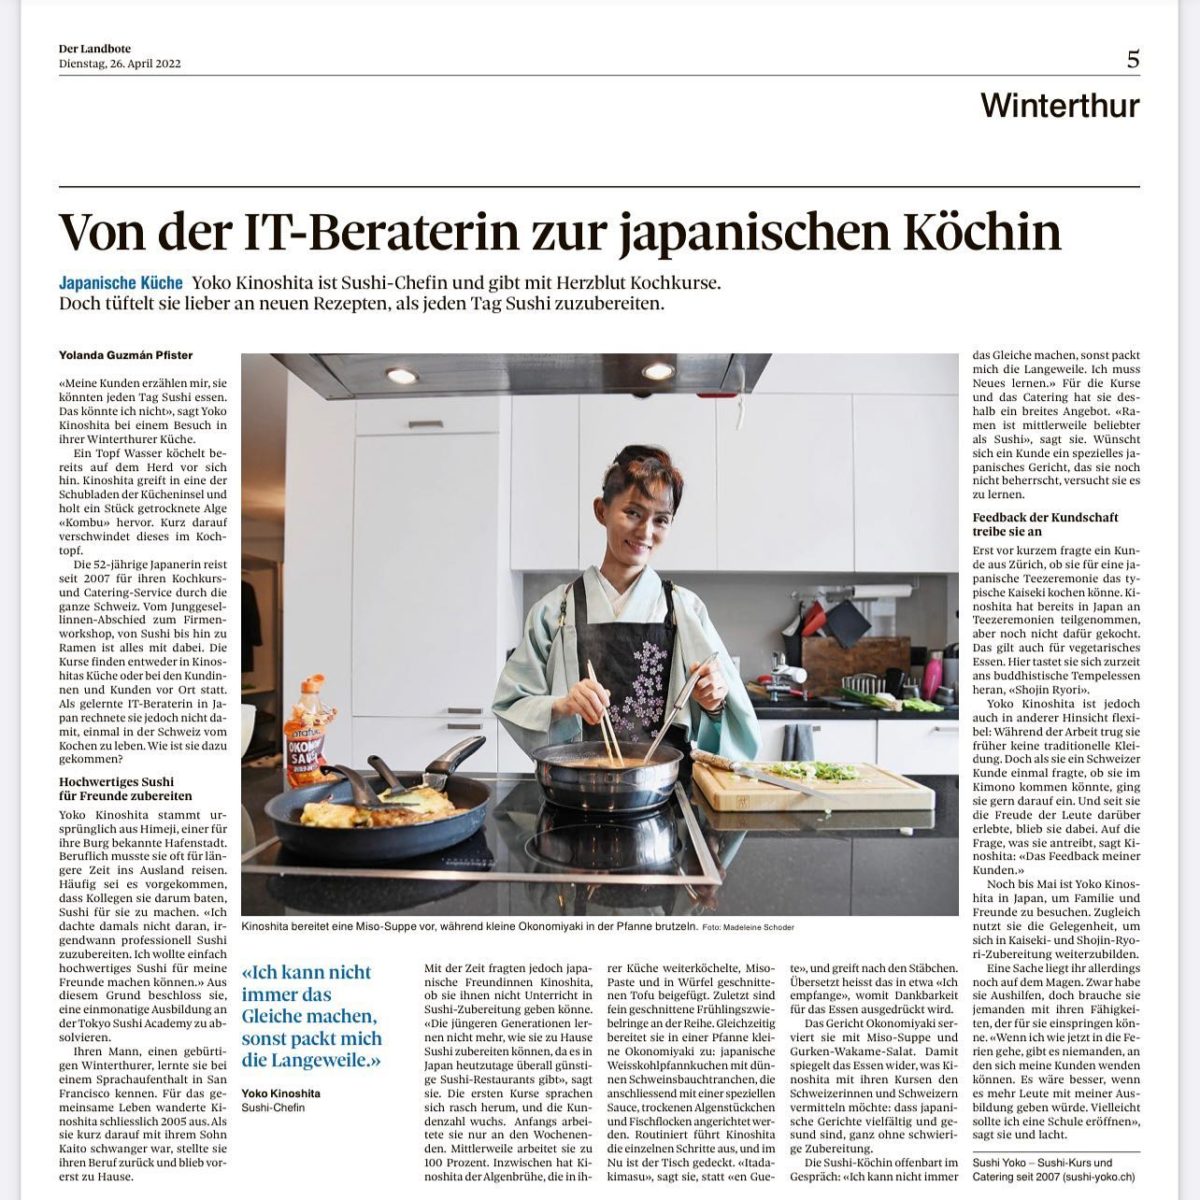 The Landbote, a daily newspaper in Winterthur visited Sushi-Yoko